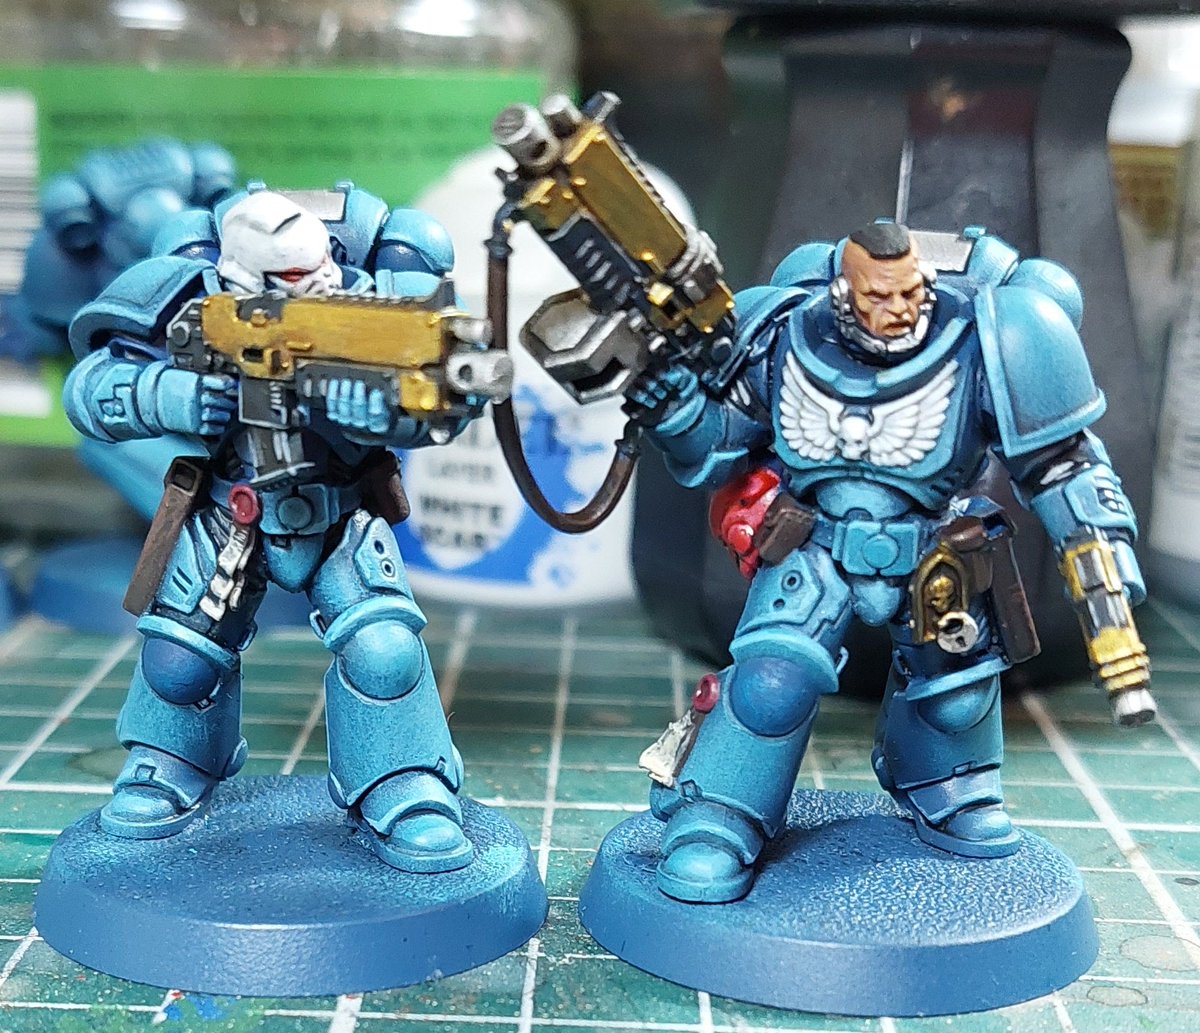 These first two #emperorsspears Intercessors are almost complete. Into the pile for decals and bases. #paintingwarhammer #WarhammerCommunity #miniaturepainting #warhammer40k #hobbystreak day 39